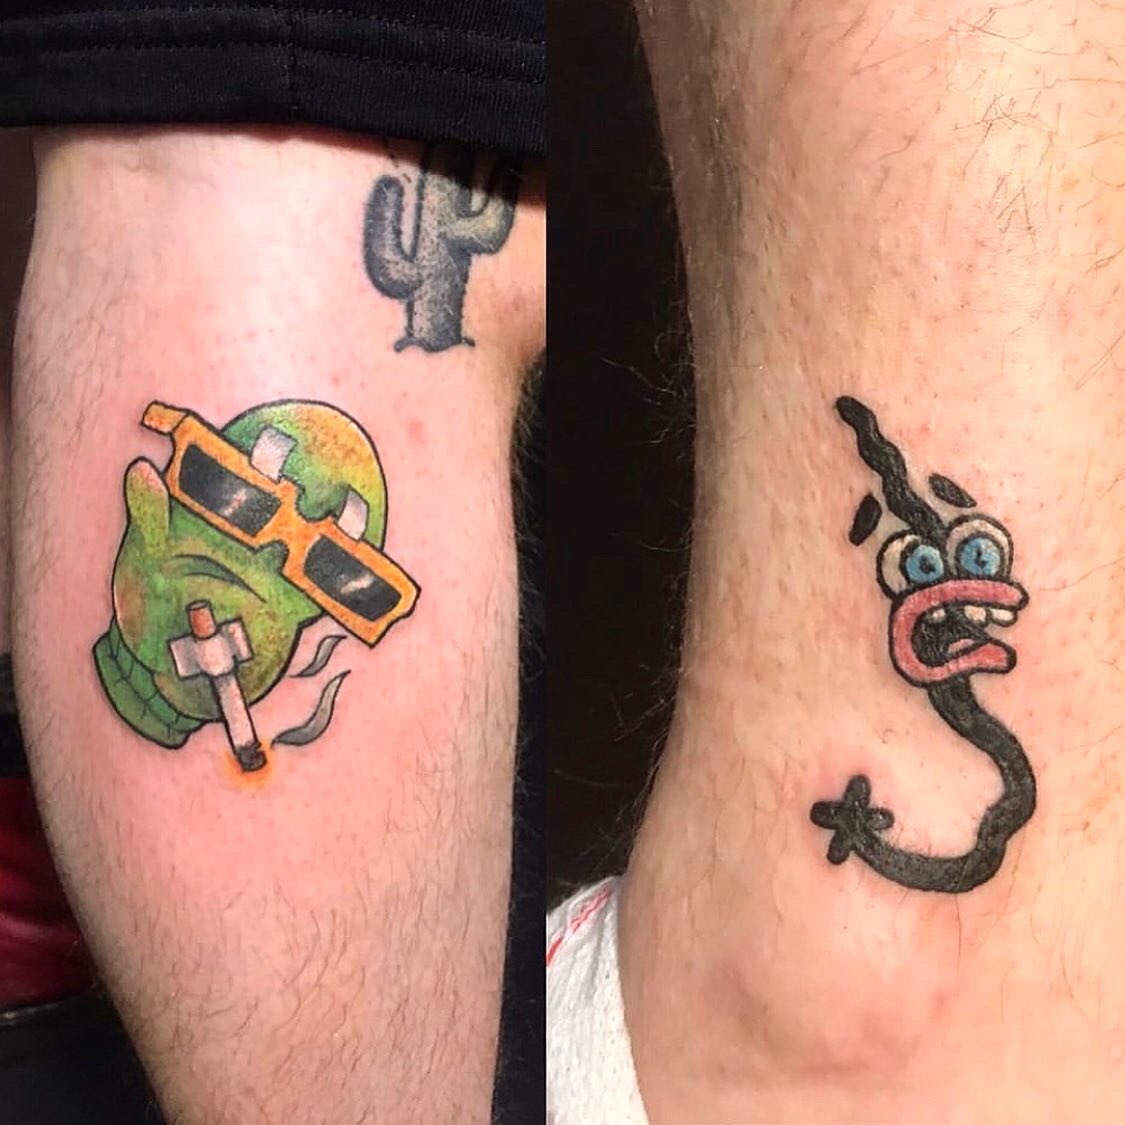 nick kroll on X: "Happy #NationalTattooDay to the @bigmouth tattoo family. Y'all have been coming through big in the last few years. https://t.co/Bx9wMRxdwZ" / X